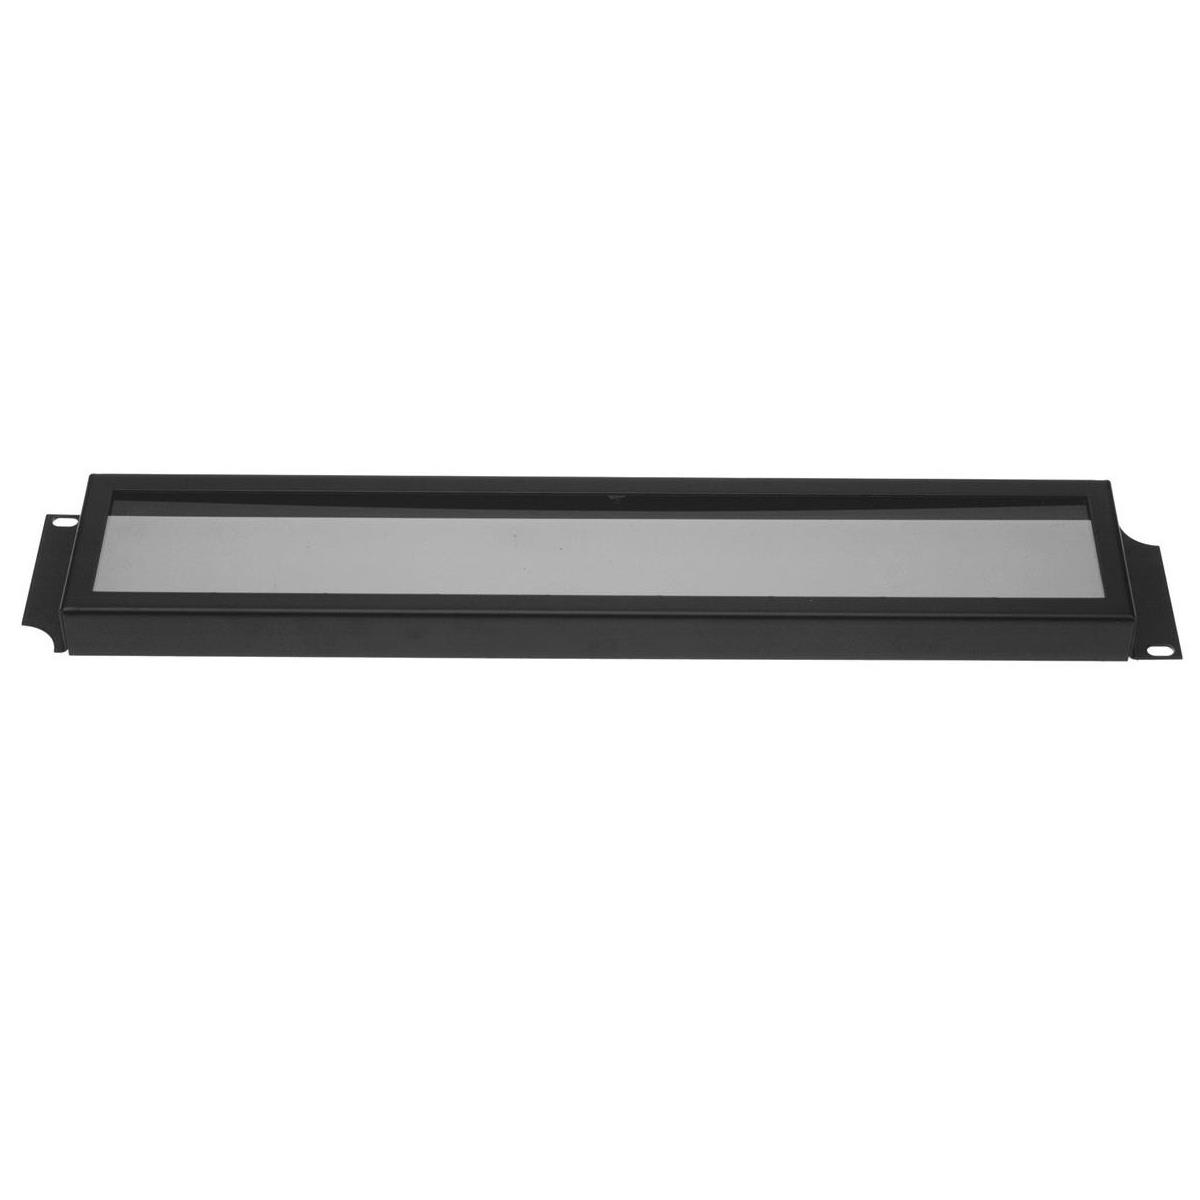 Image of Lowell Manufacturing SSC-2P 2U Rack Panel Security Cover